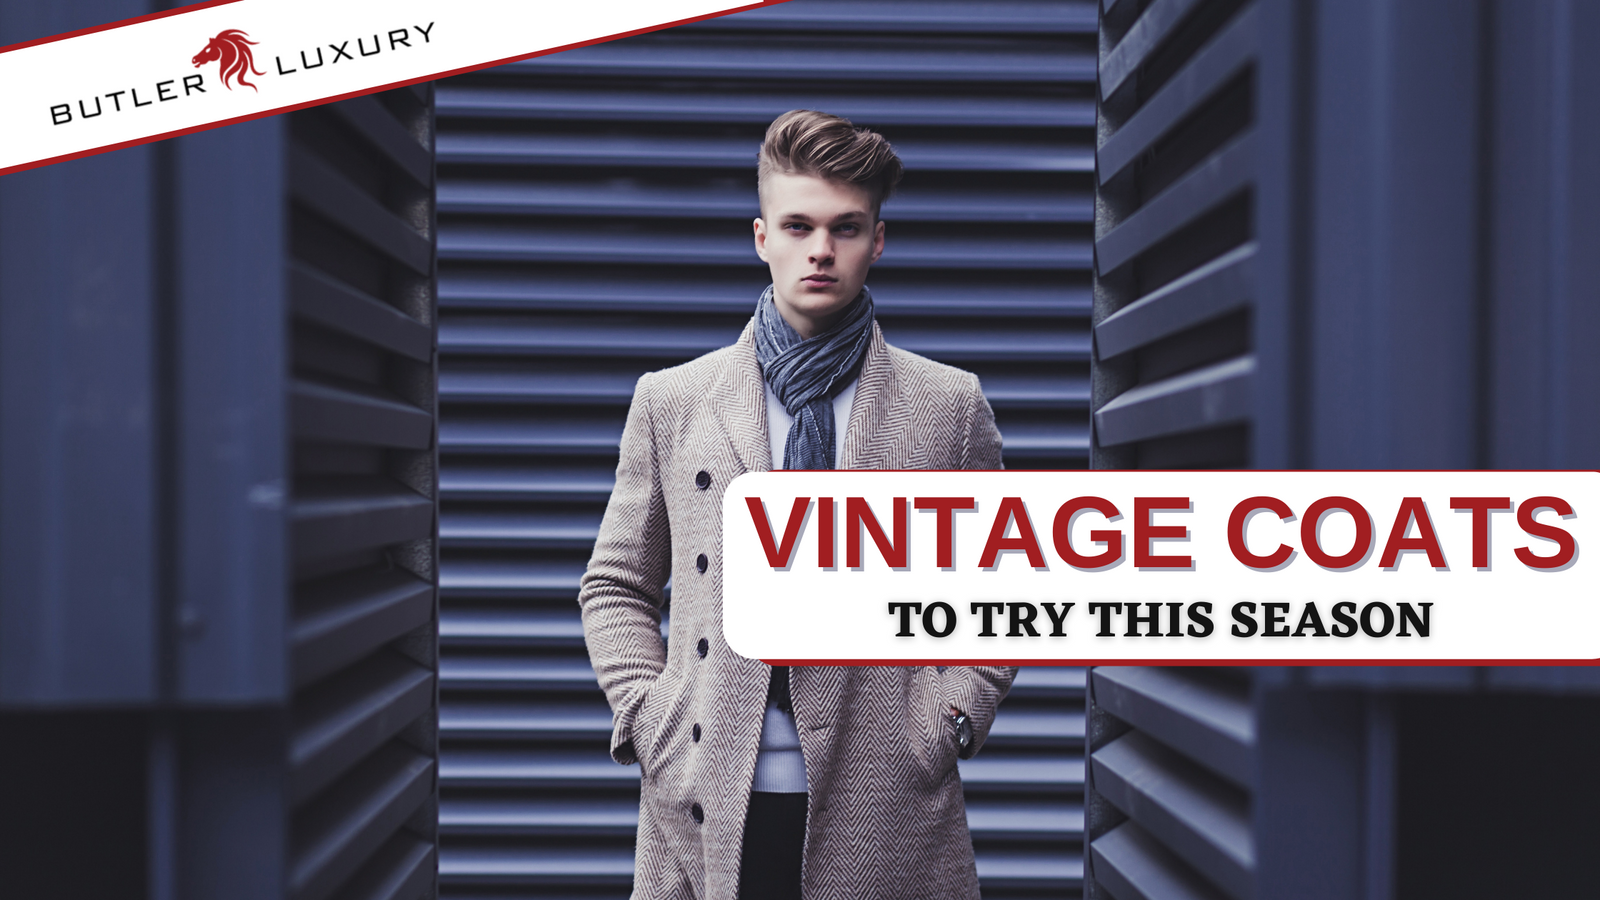 5 Men’s Vintage Coat Styles to Adopt This Year - Butler Luxury